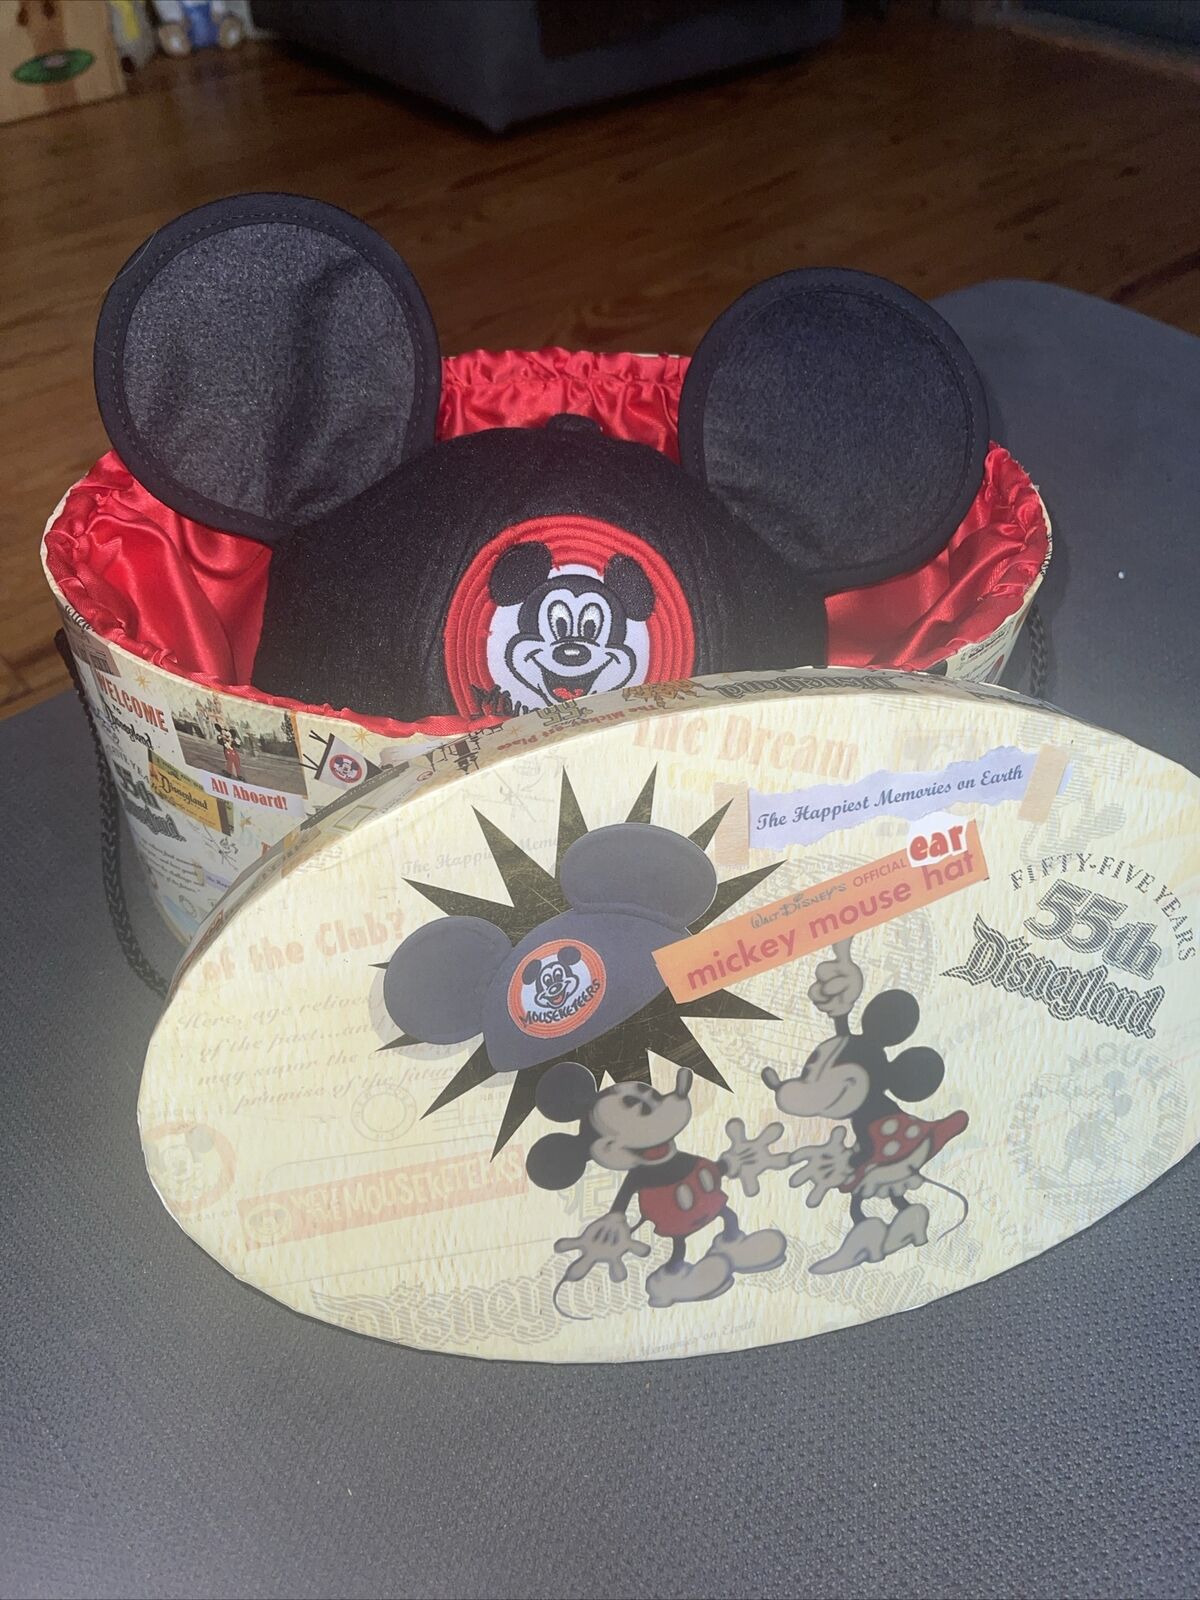 Disneyland 55th Anniversary Ear Mouseketeers Hat 2010 Brand New Limited To 1955